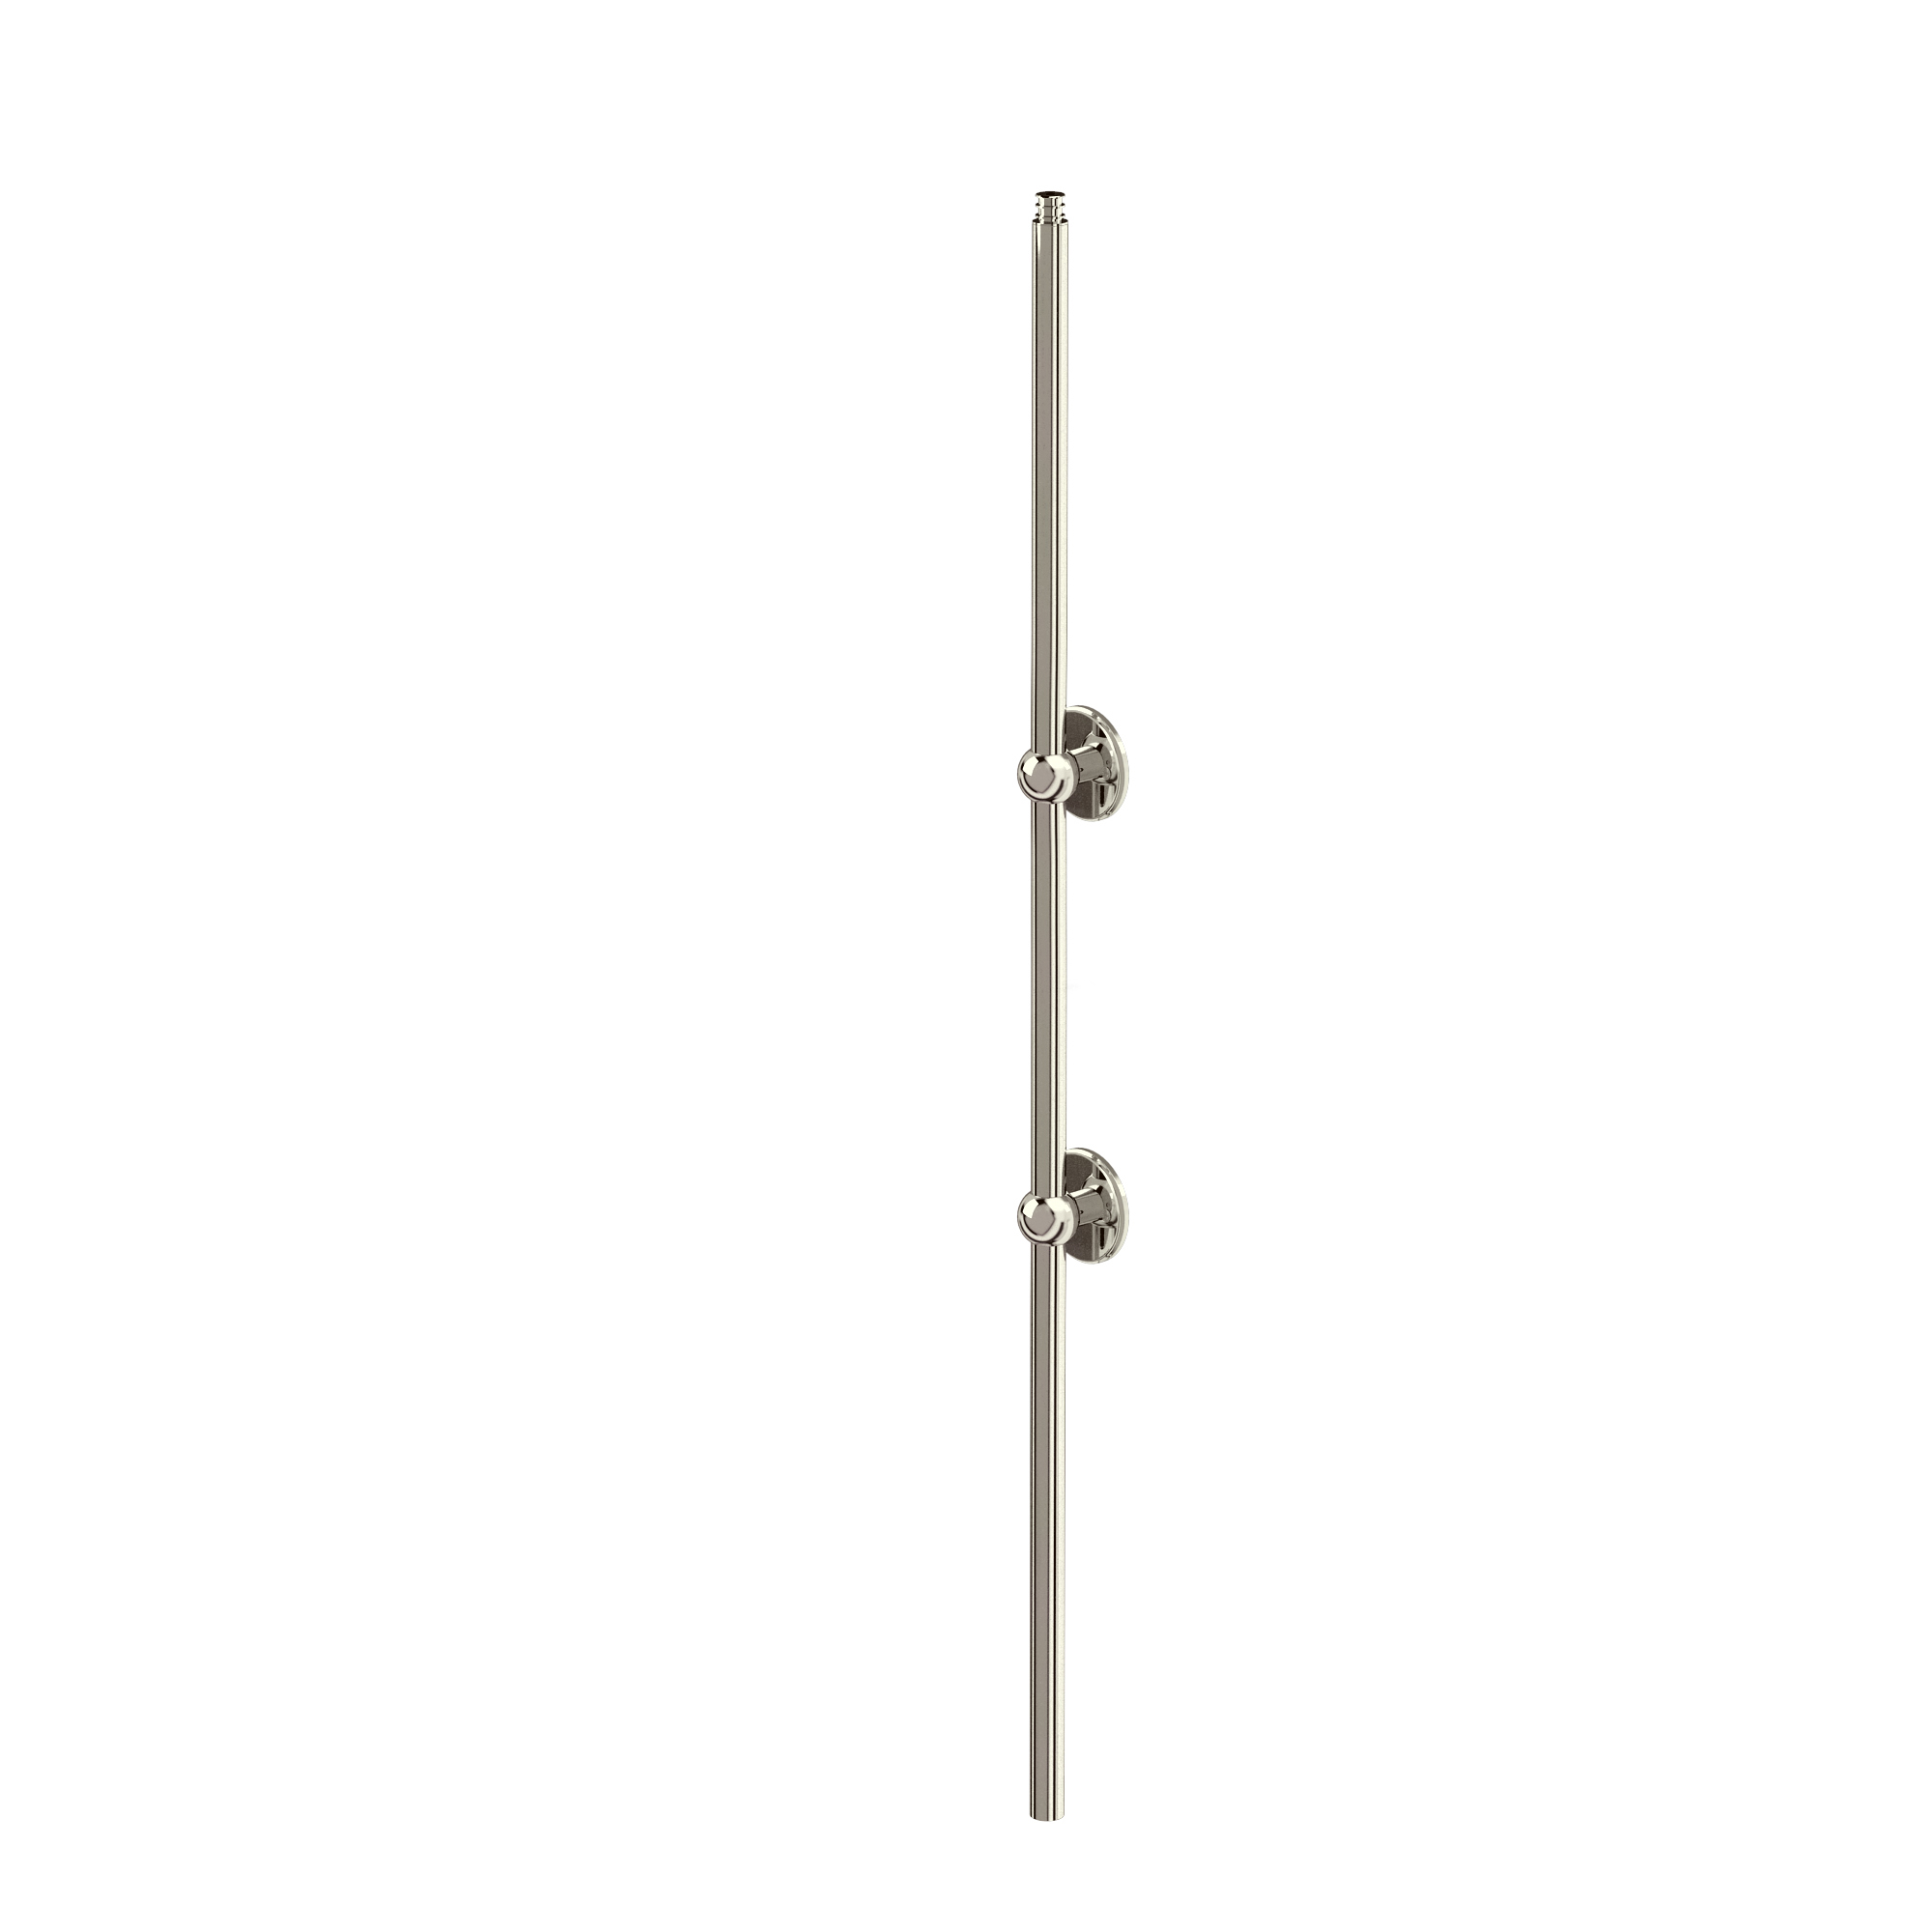 Arcade Extended vertical riser  (with two adjustable vertical riser wall brackets) - nickel